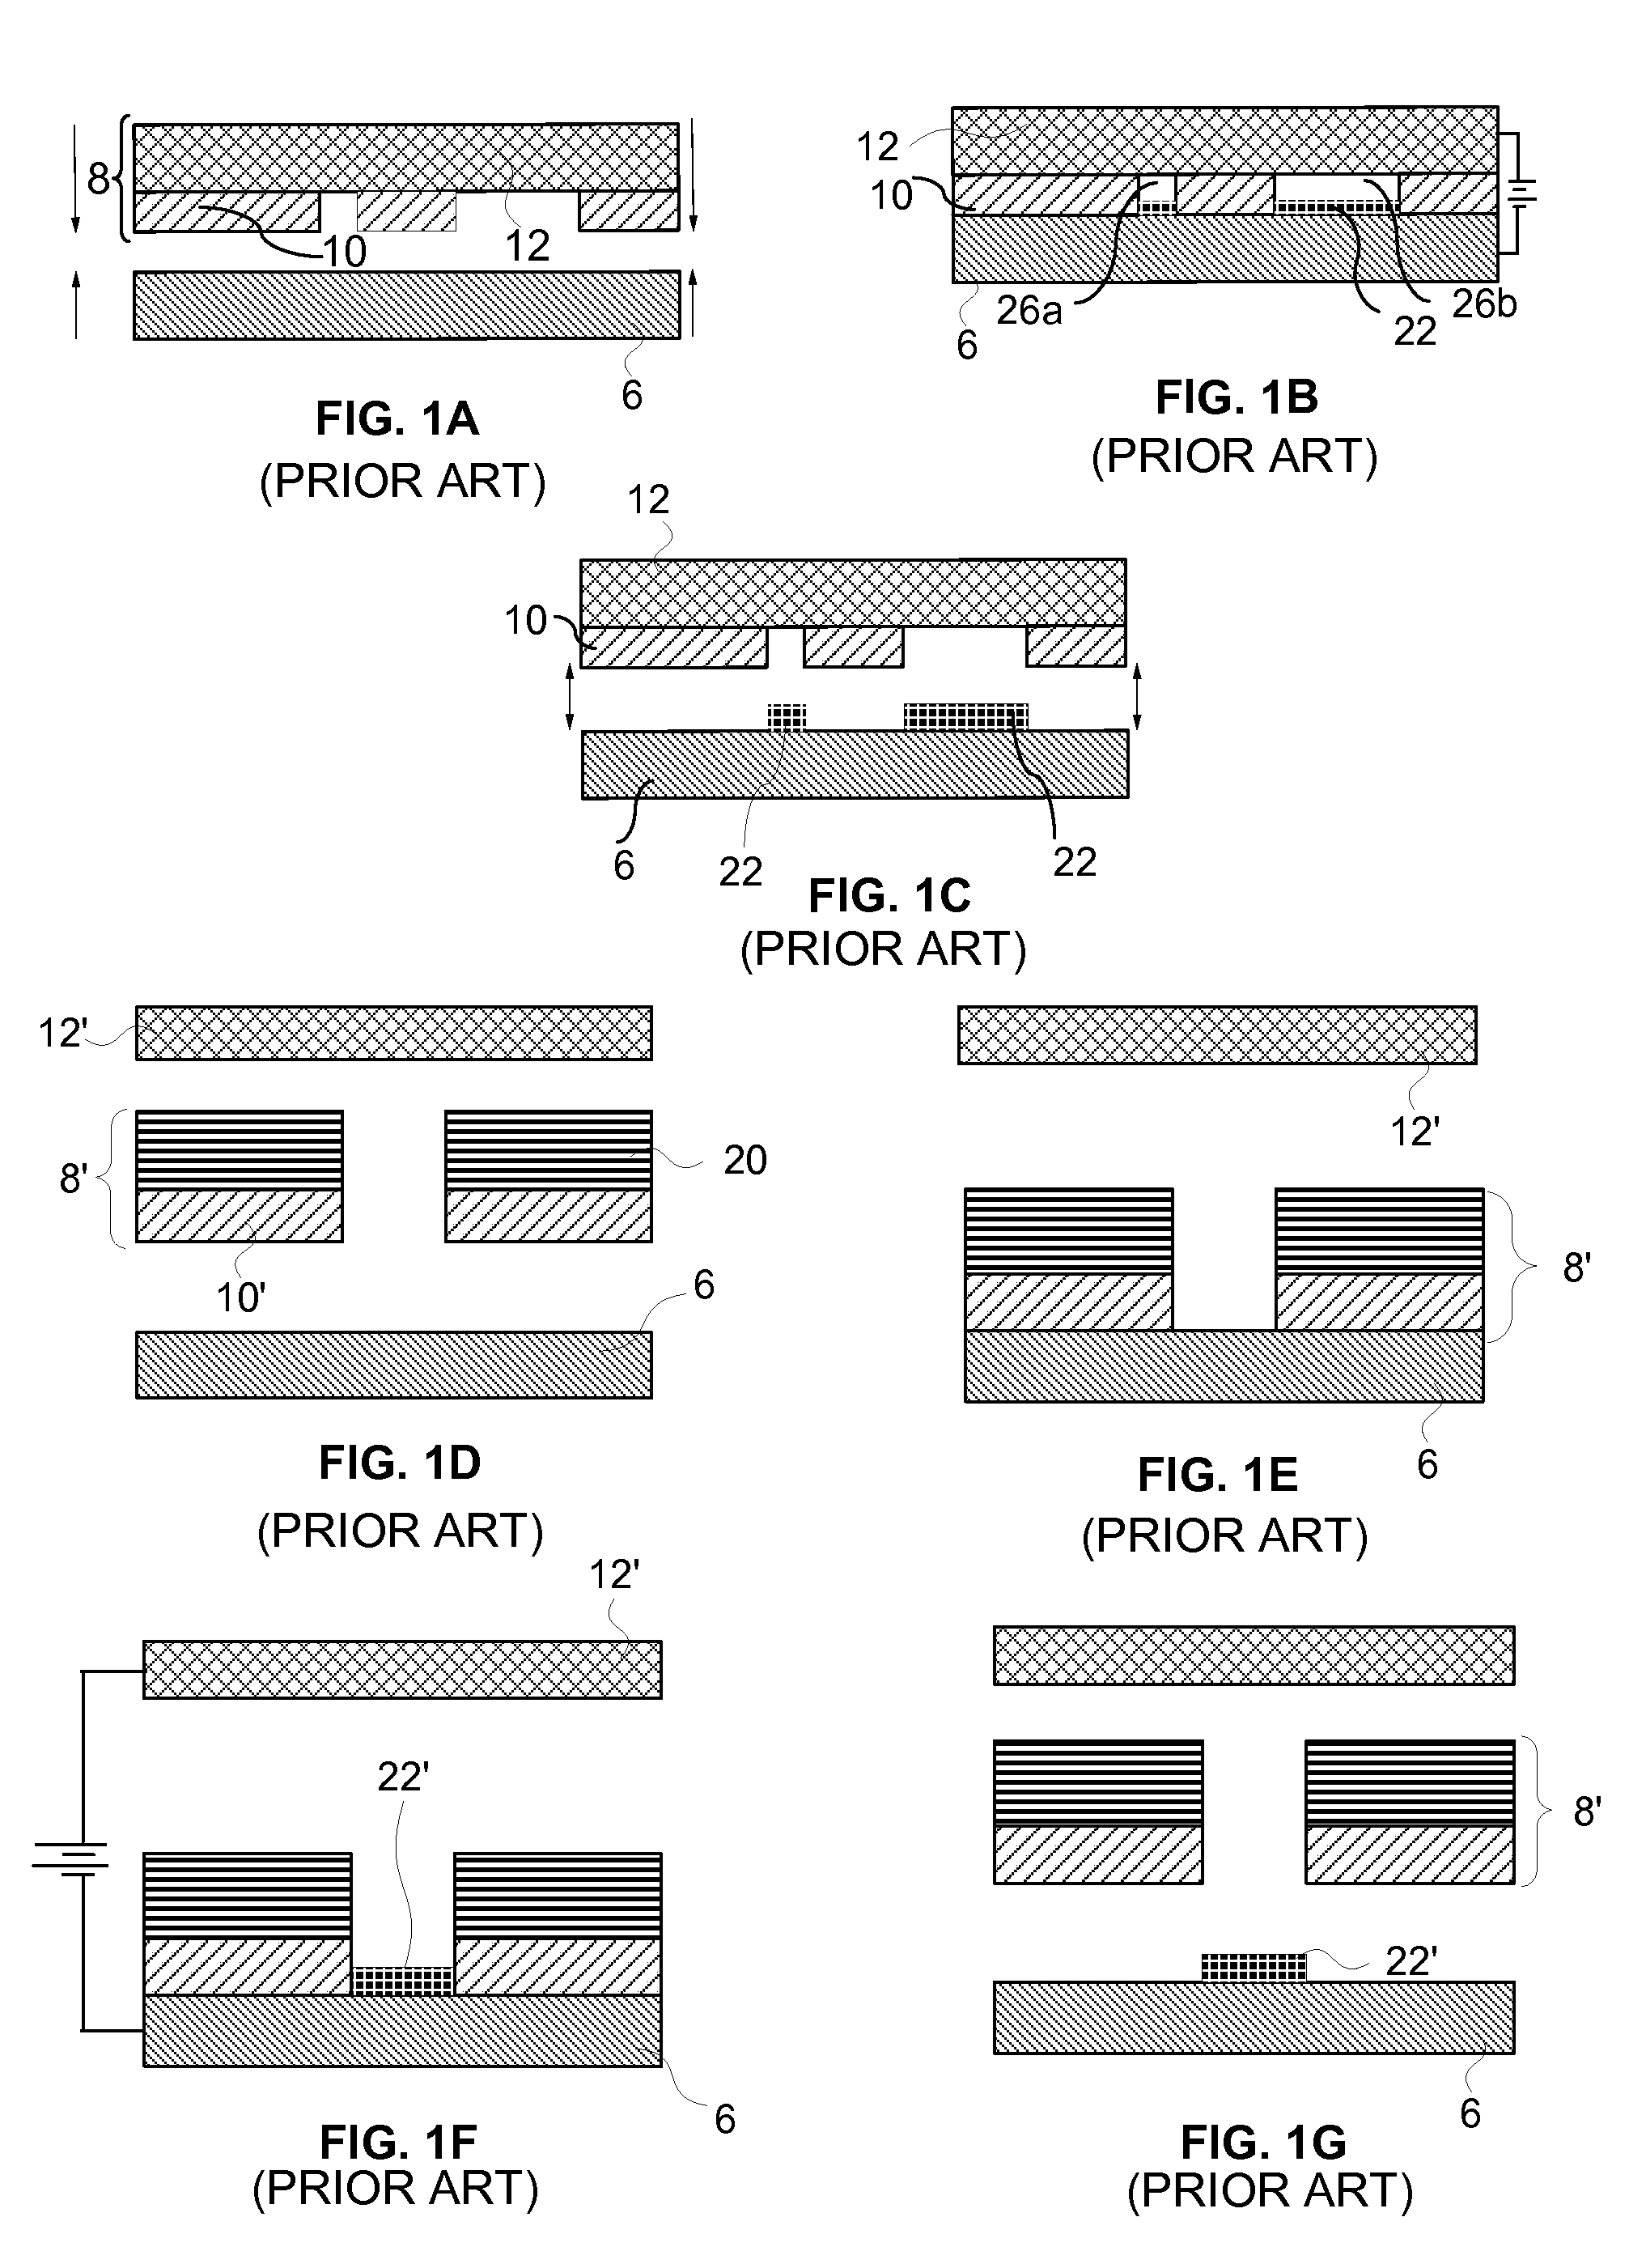 Multi-layer three-dimensional structures having features smaller than a minimum feature size associated with the formation of individual layers